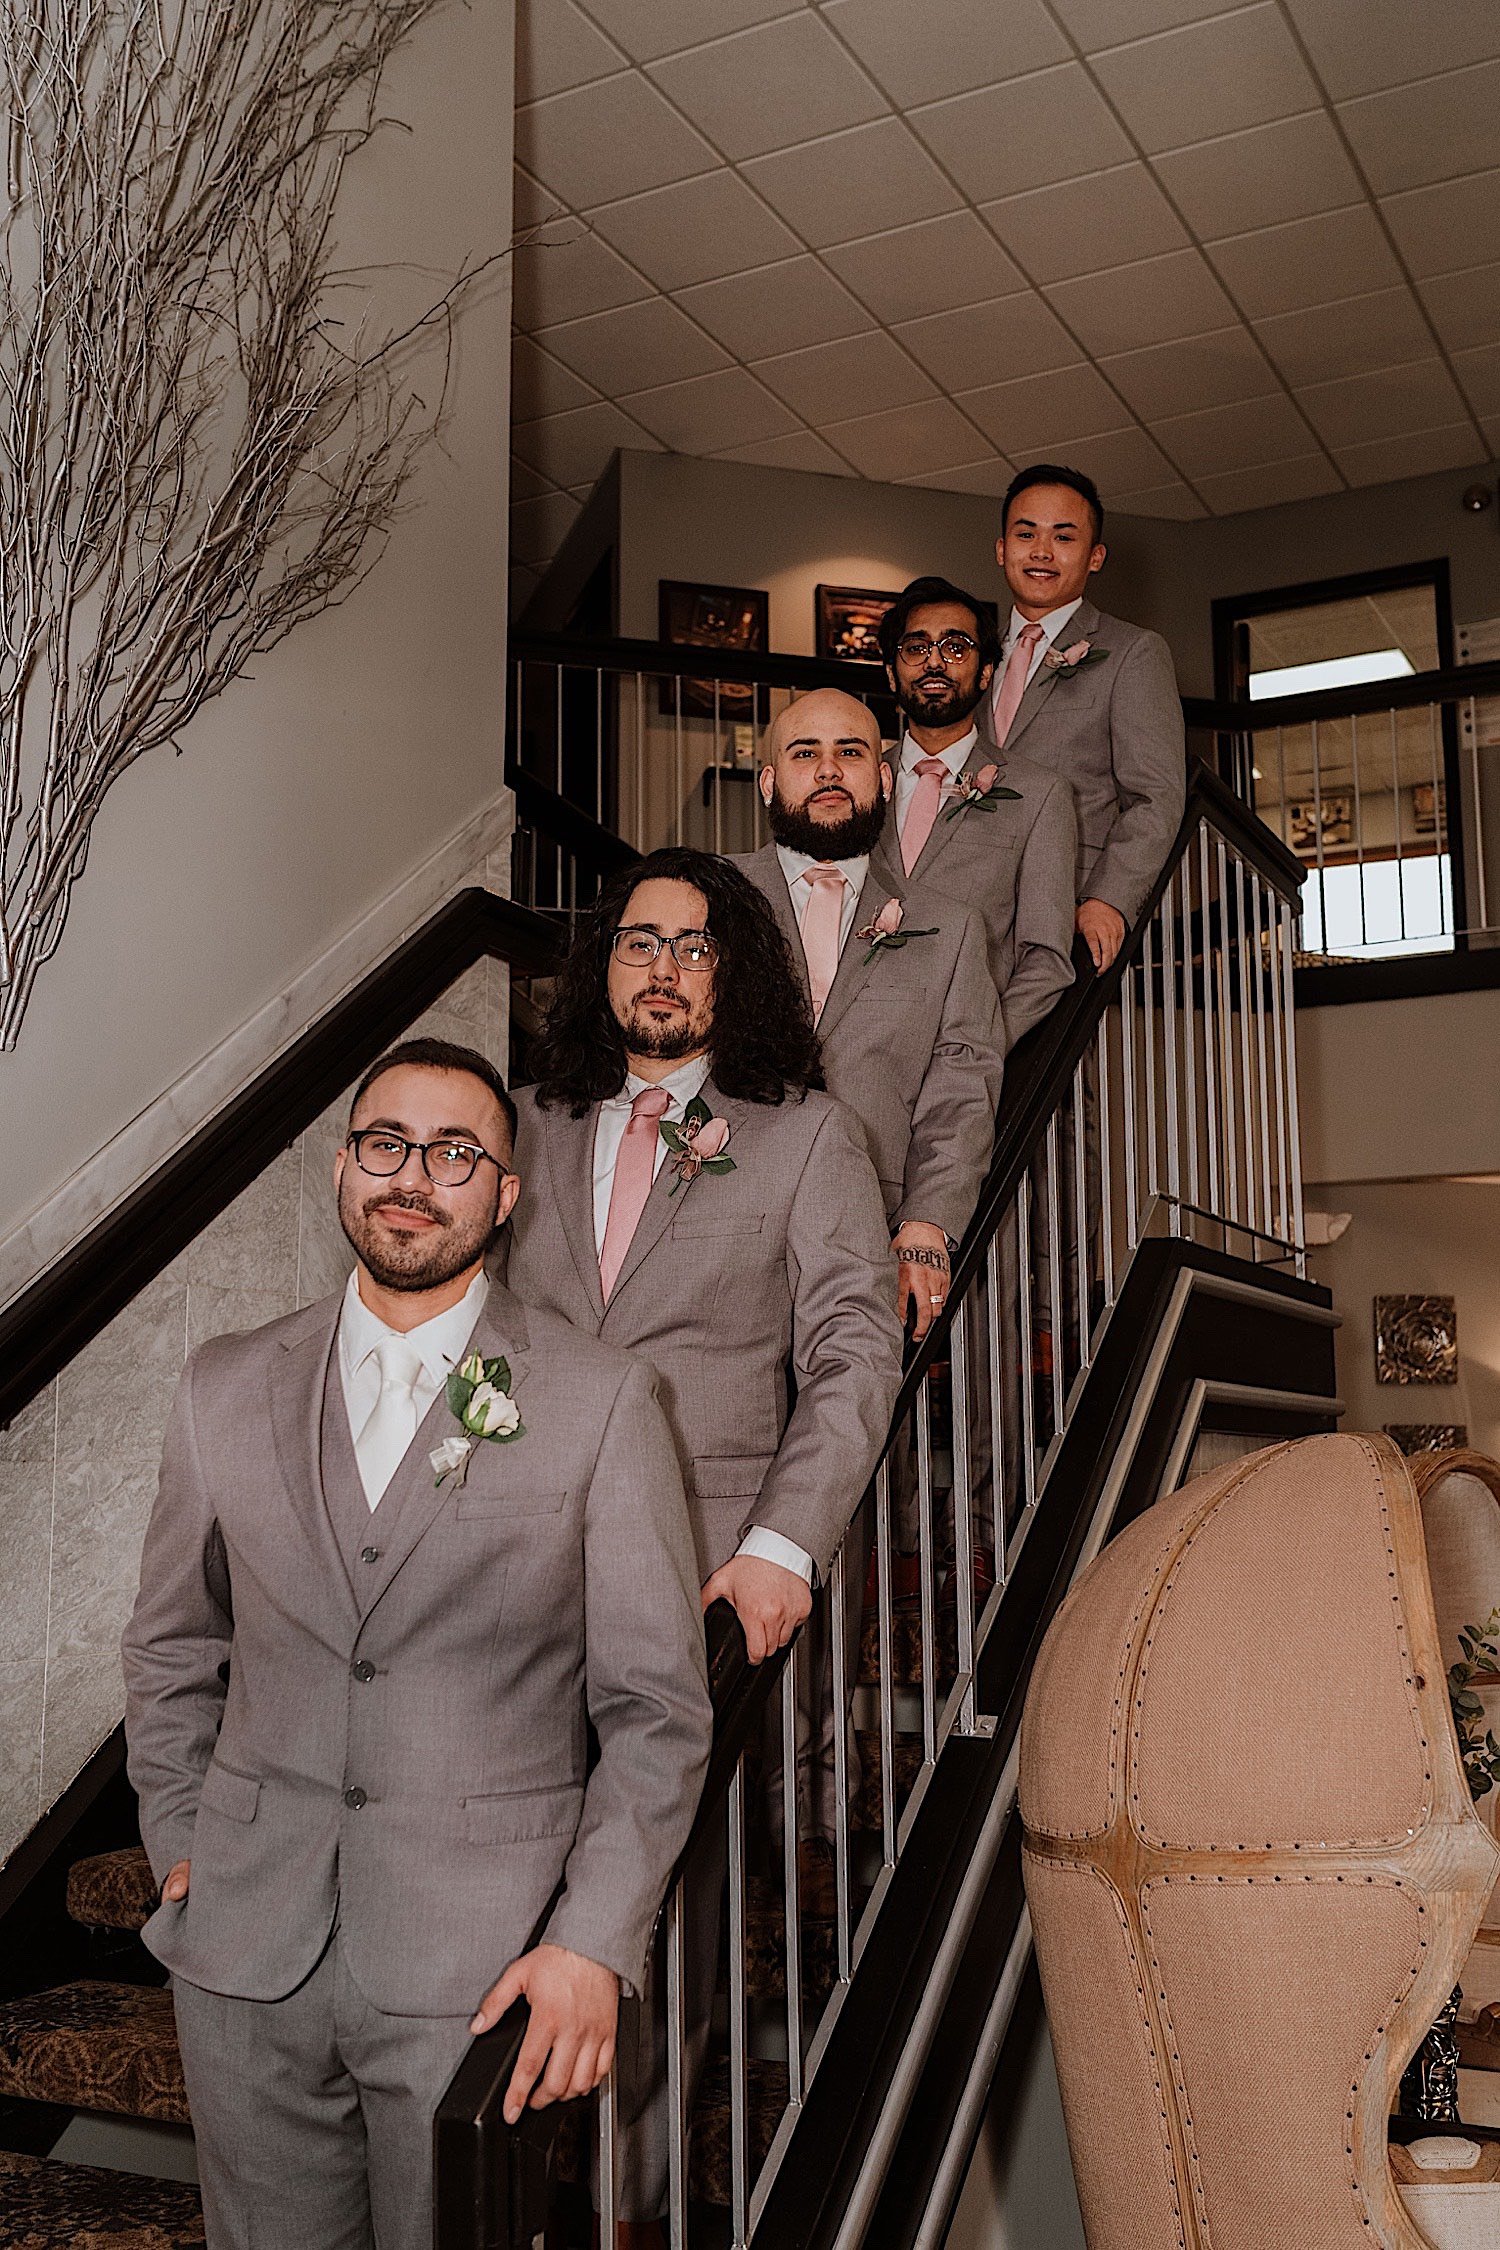 Groom and groomsmen line up on railing of staircase